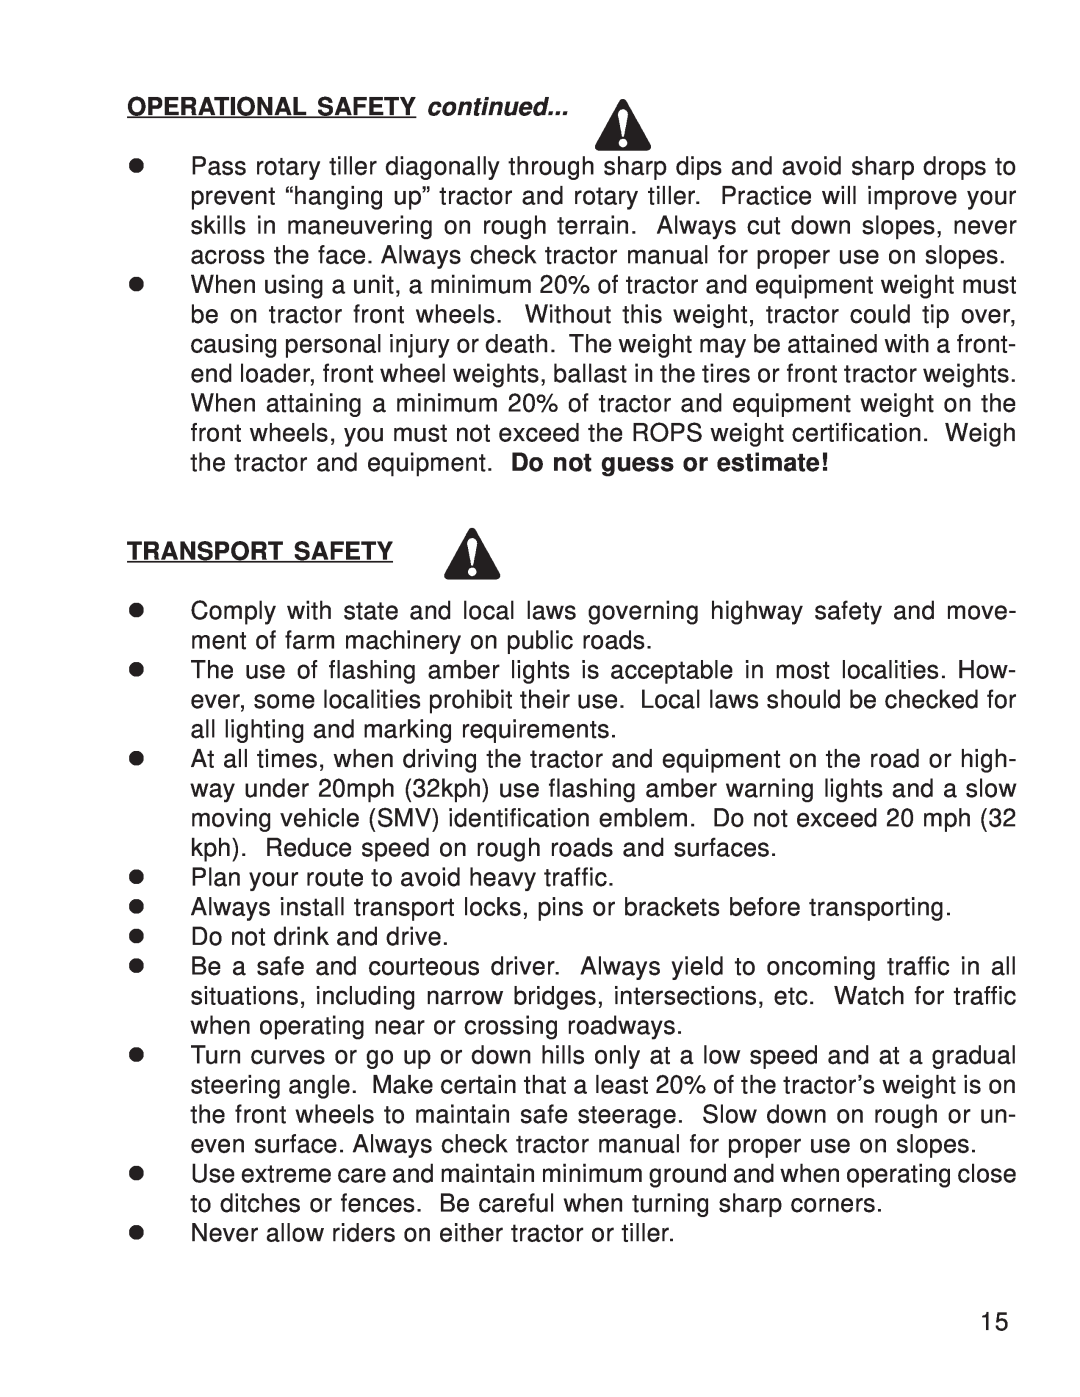 Lennox Hearth 999995 manual OPERATIONAL SAFETYcontinued, Transport Safety 